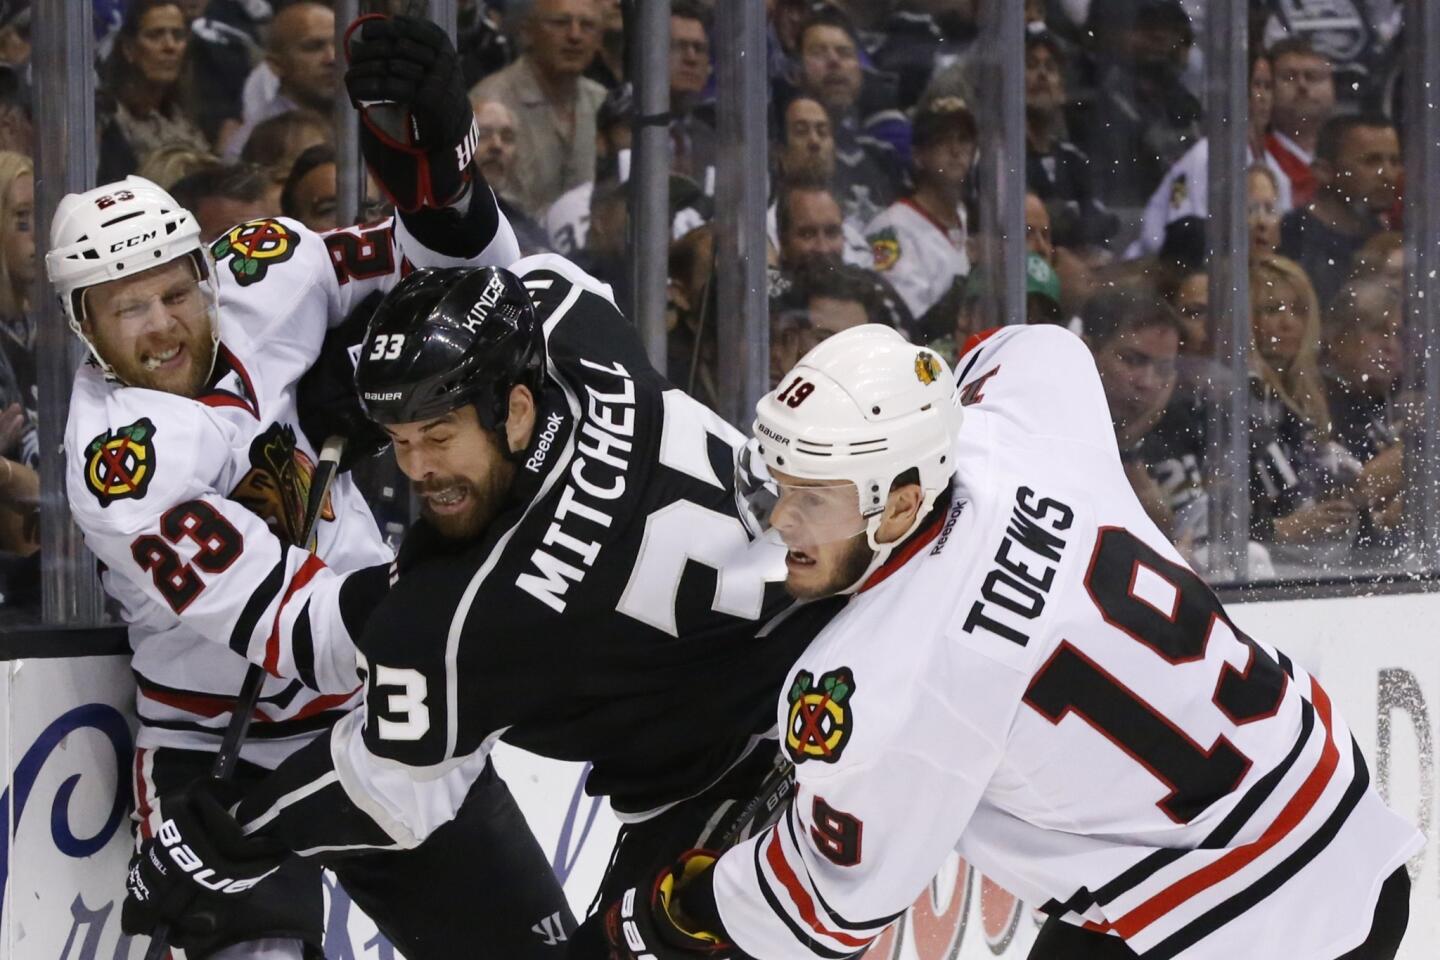 Kings defenseman Willie Mitchell, center, battles Chicago Blackhawks teammates Kris Versteeg, left, and Jonathan Toews along the boards during the second period of Game 4 of the Western Conference finals at Staples Center.